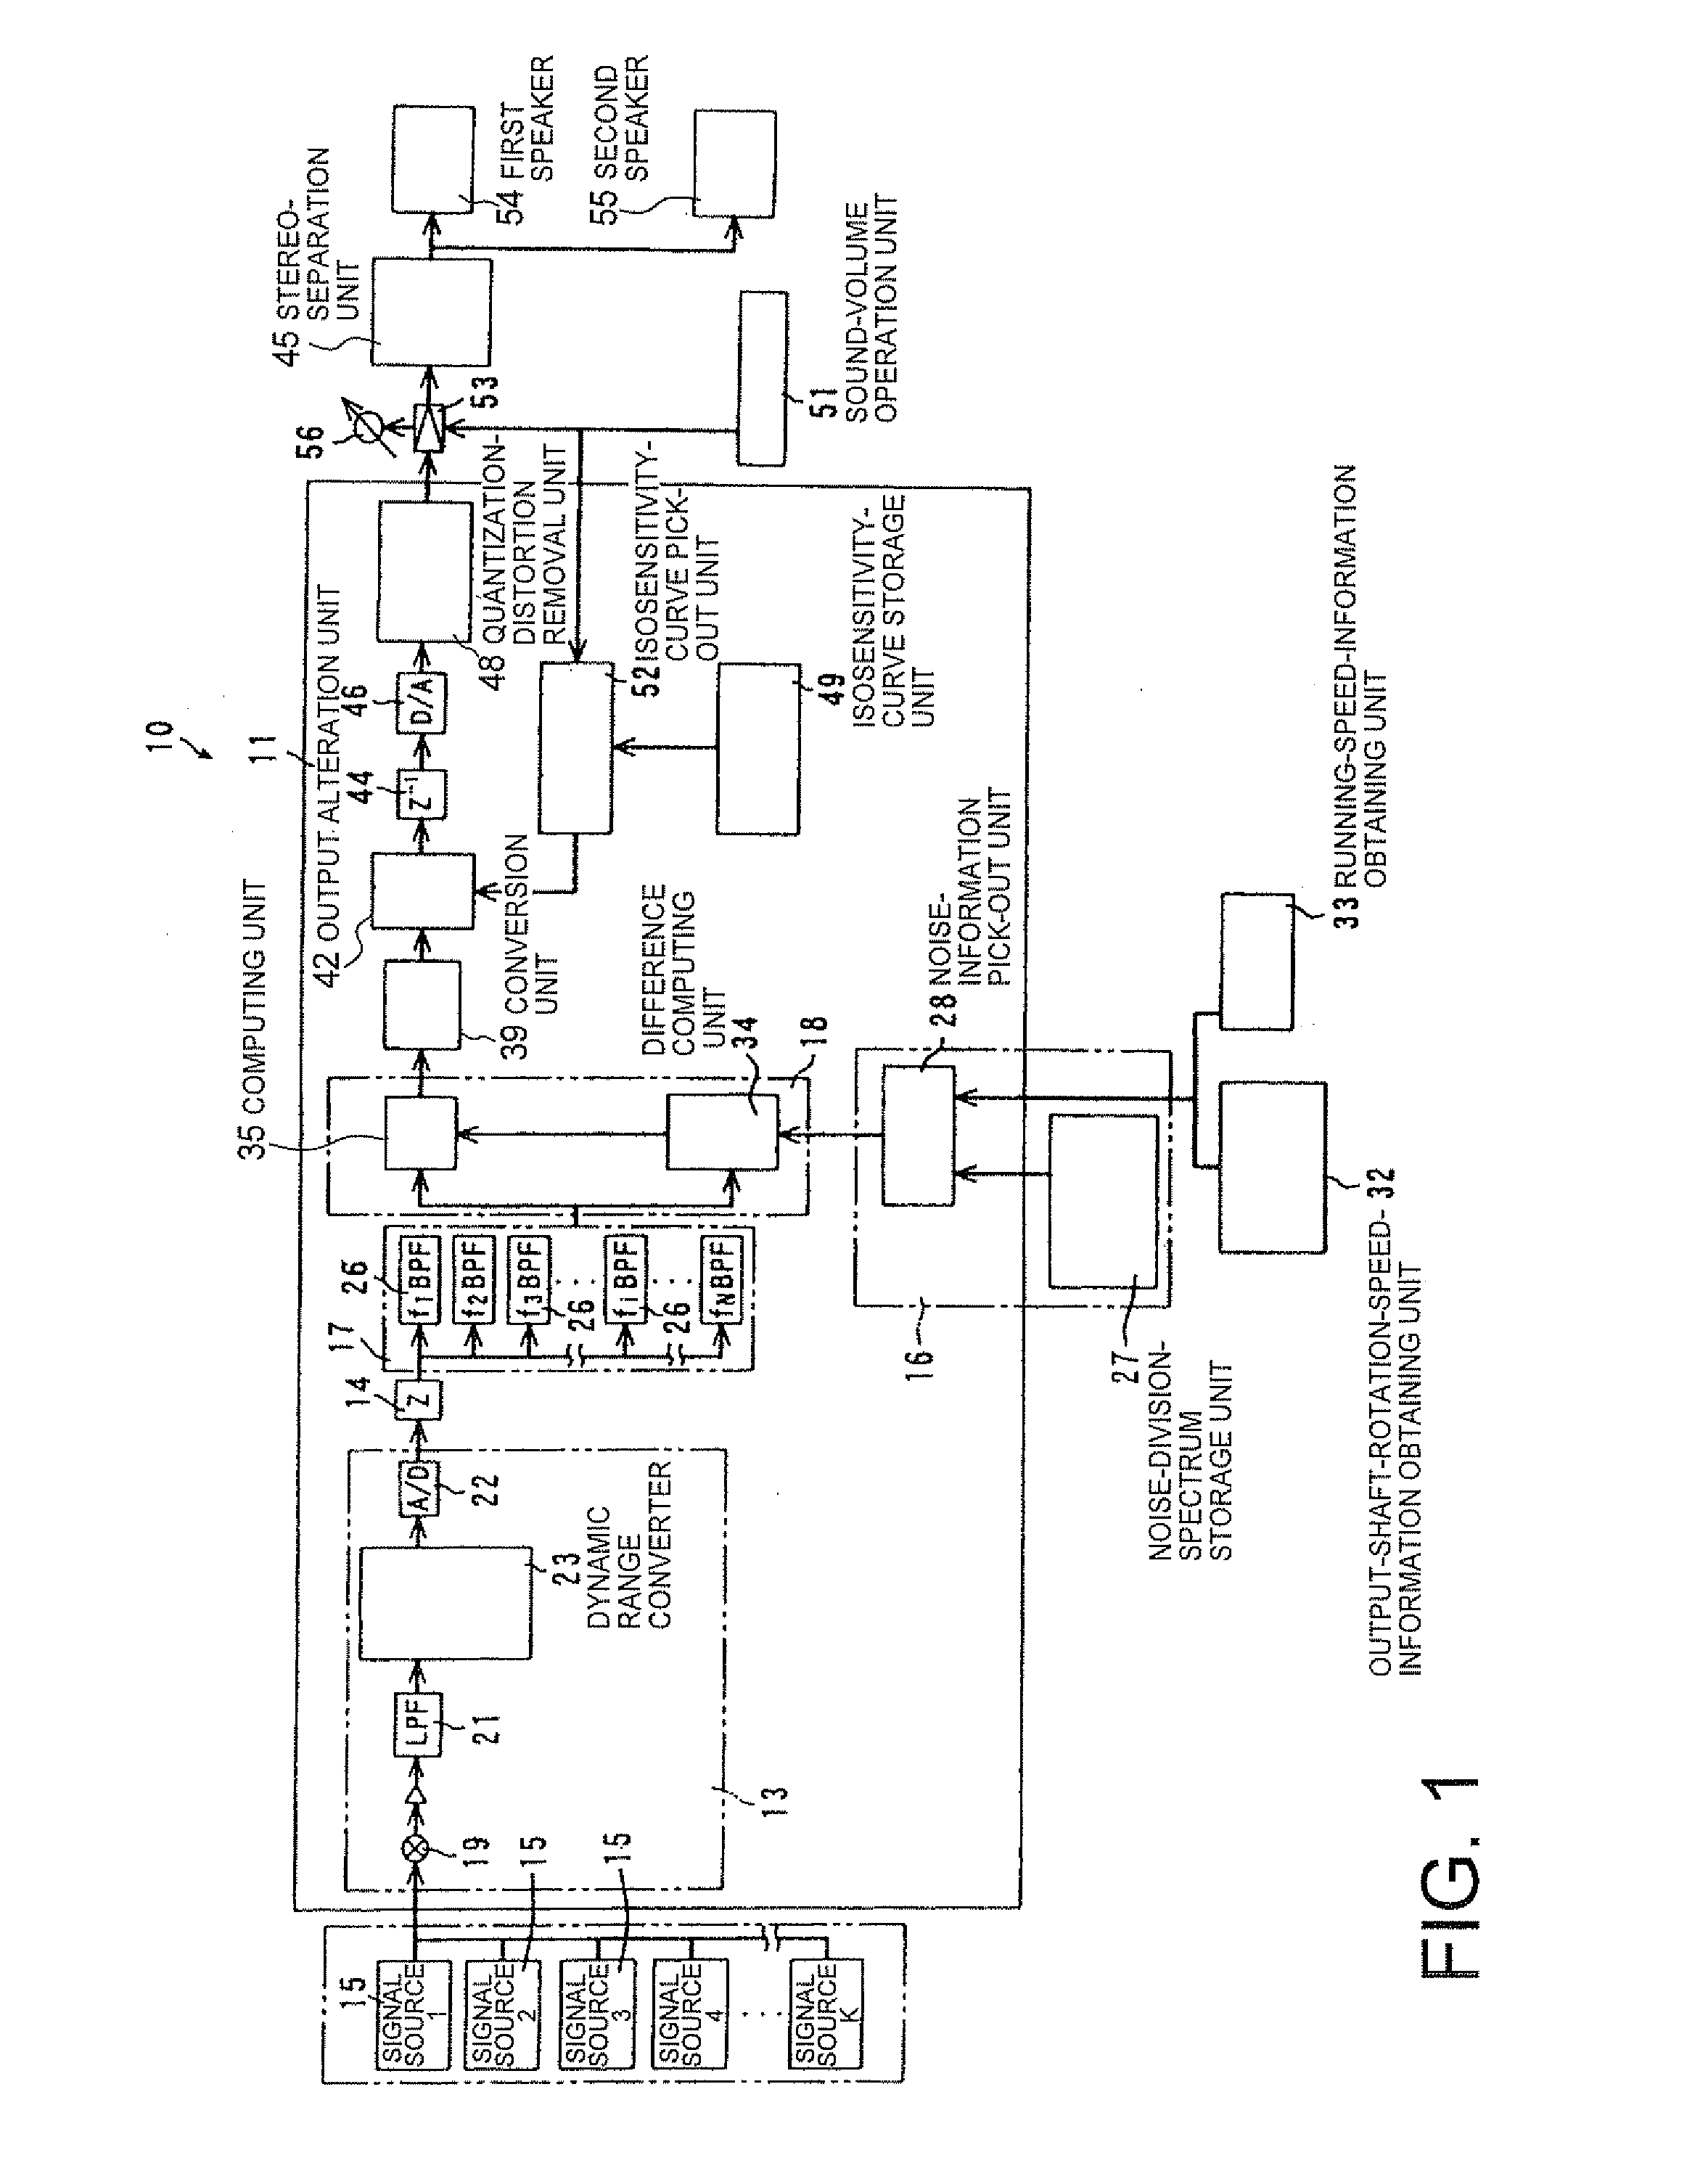 Sound device and sound control device